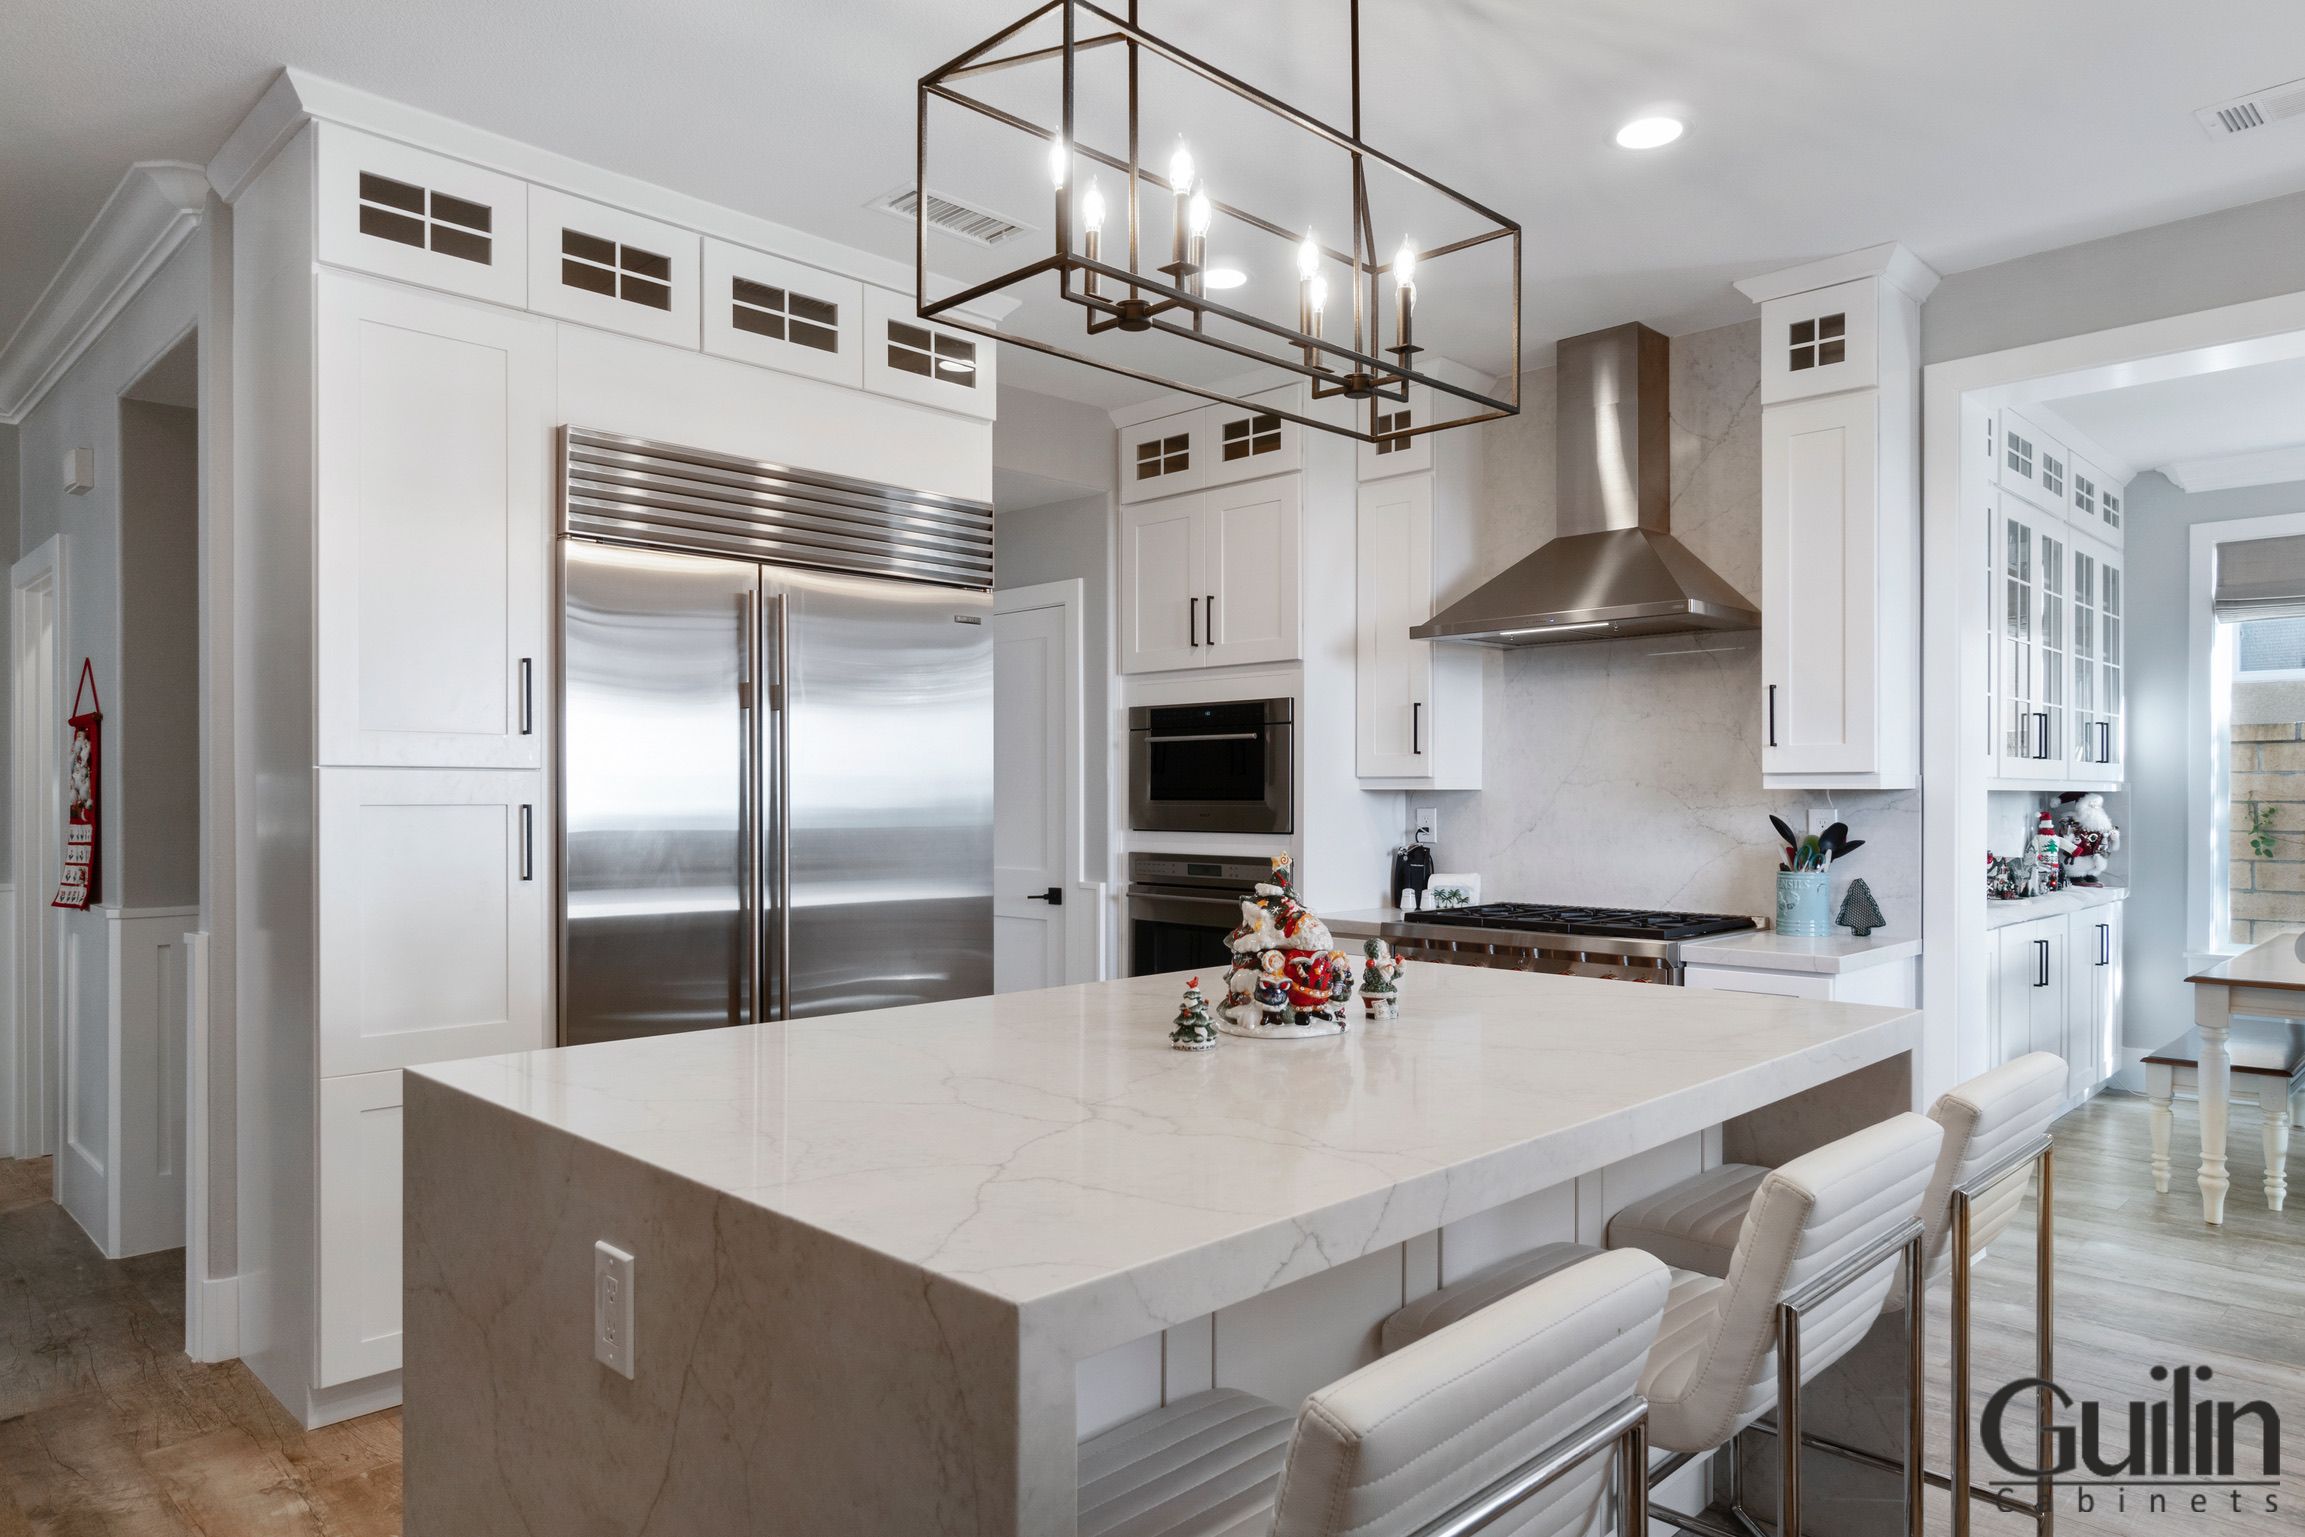 https://guilincabinets.com/wp-content/uploads/2023/01/Remodeling-a-Kitchen-in-Aliso-Viejo-Orange-County-CA-with-a-Sleek-Design-5.jpg